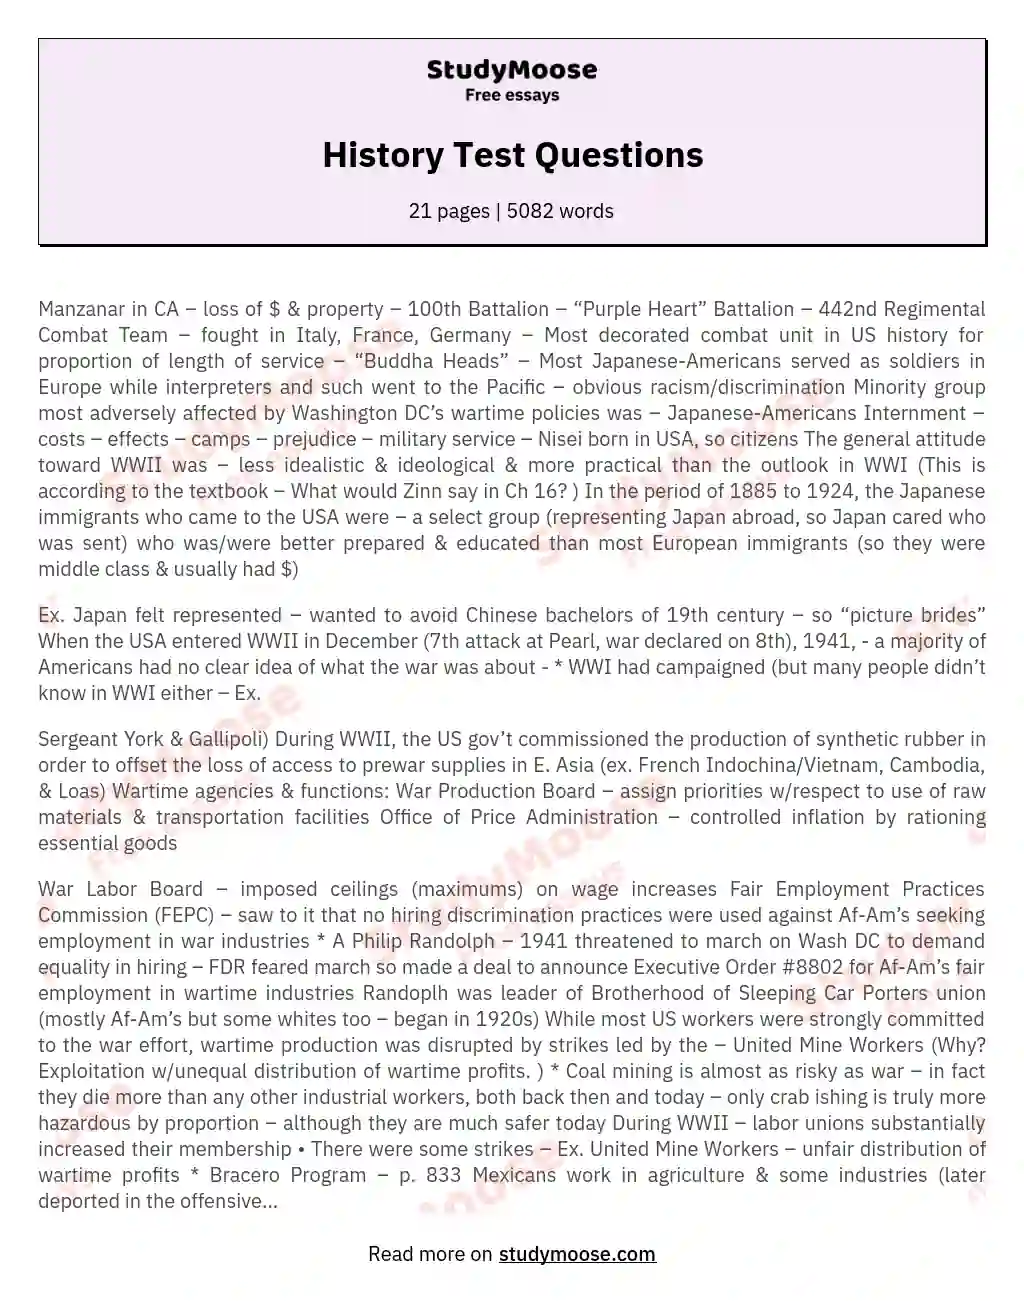 History Test Questions